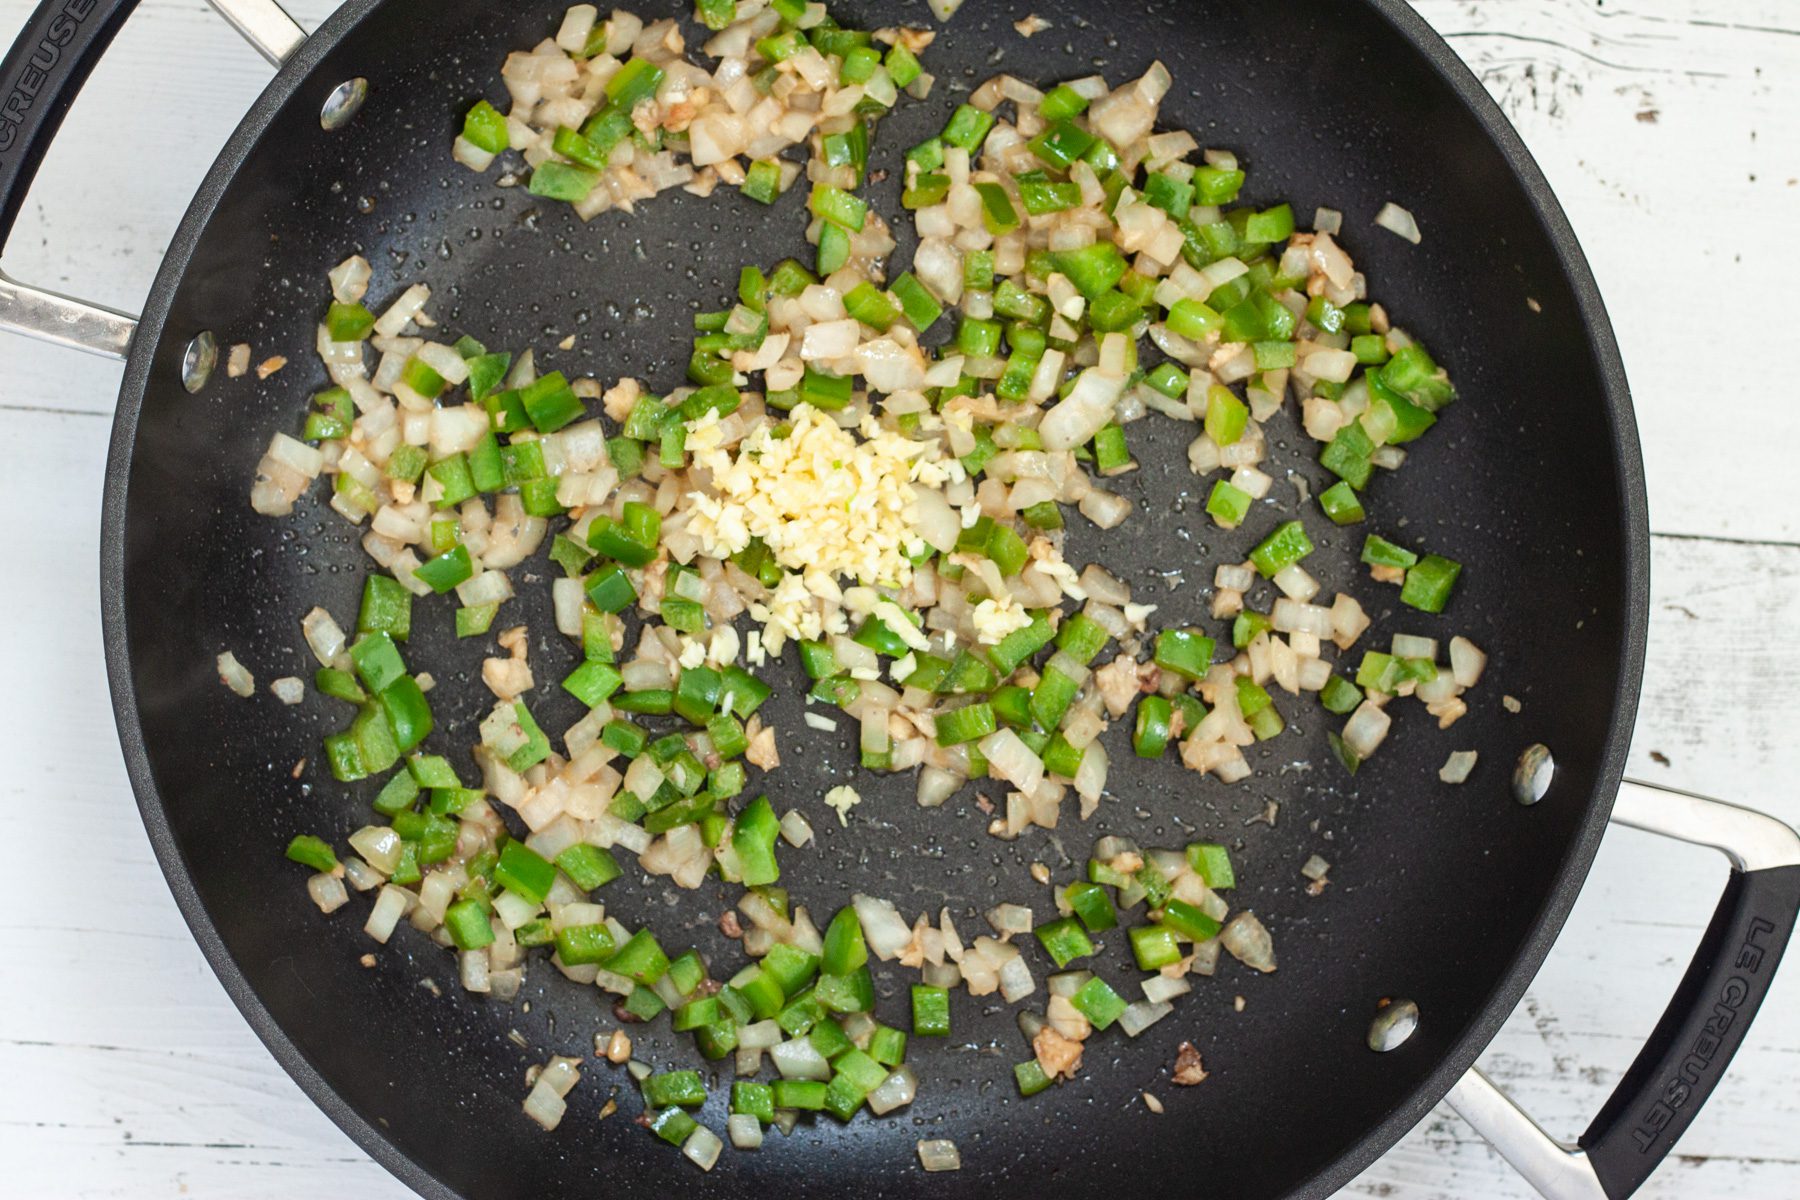 garlic and diced onion and peppers cooking in a pan